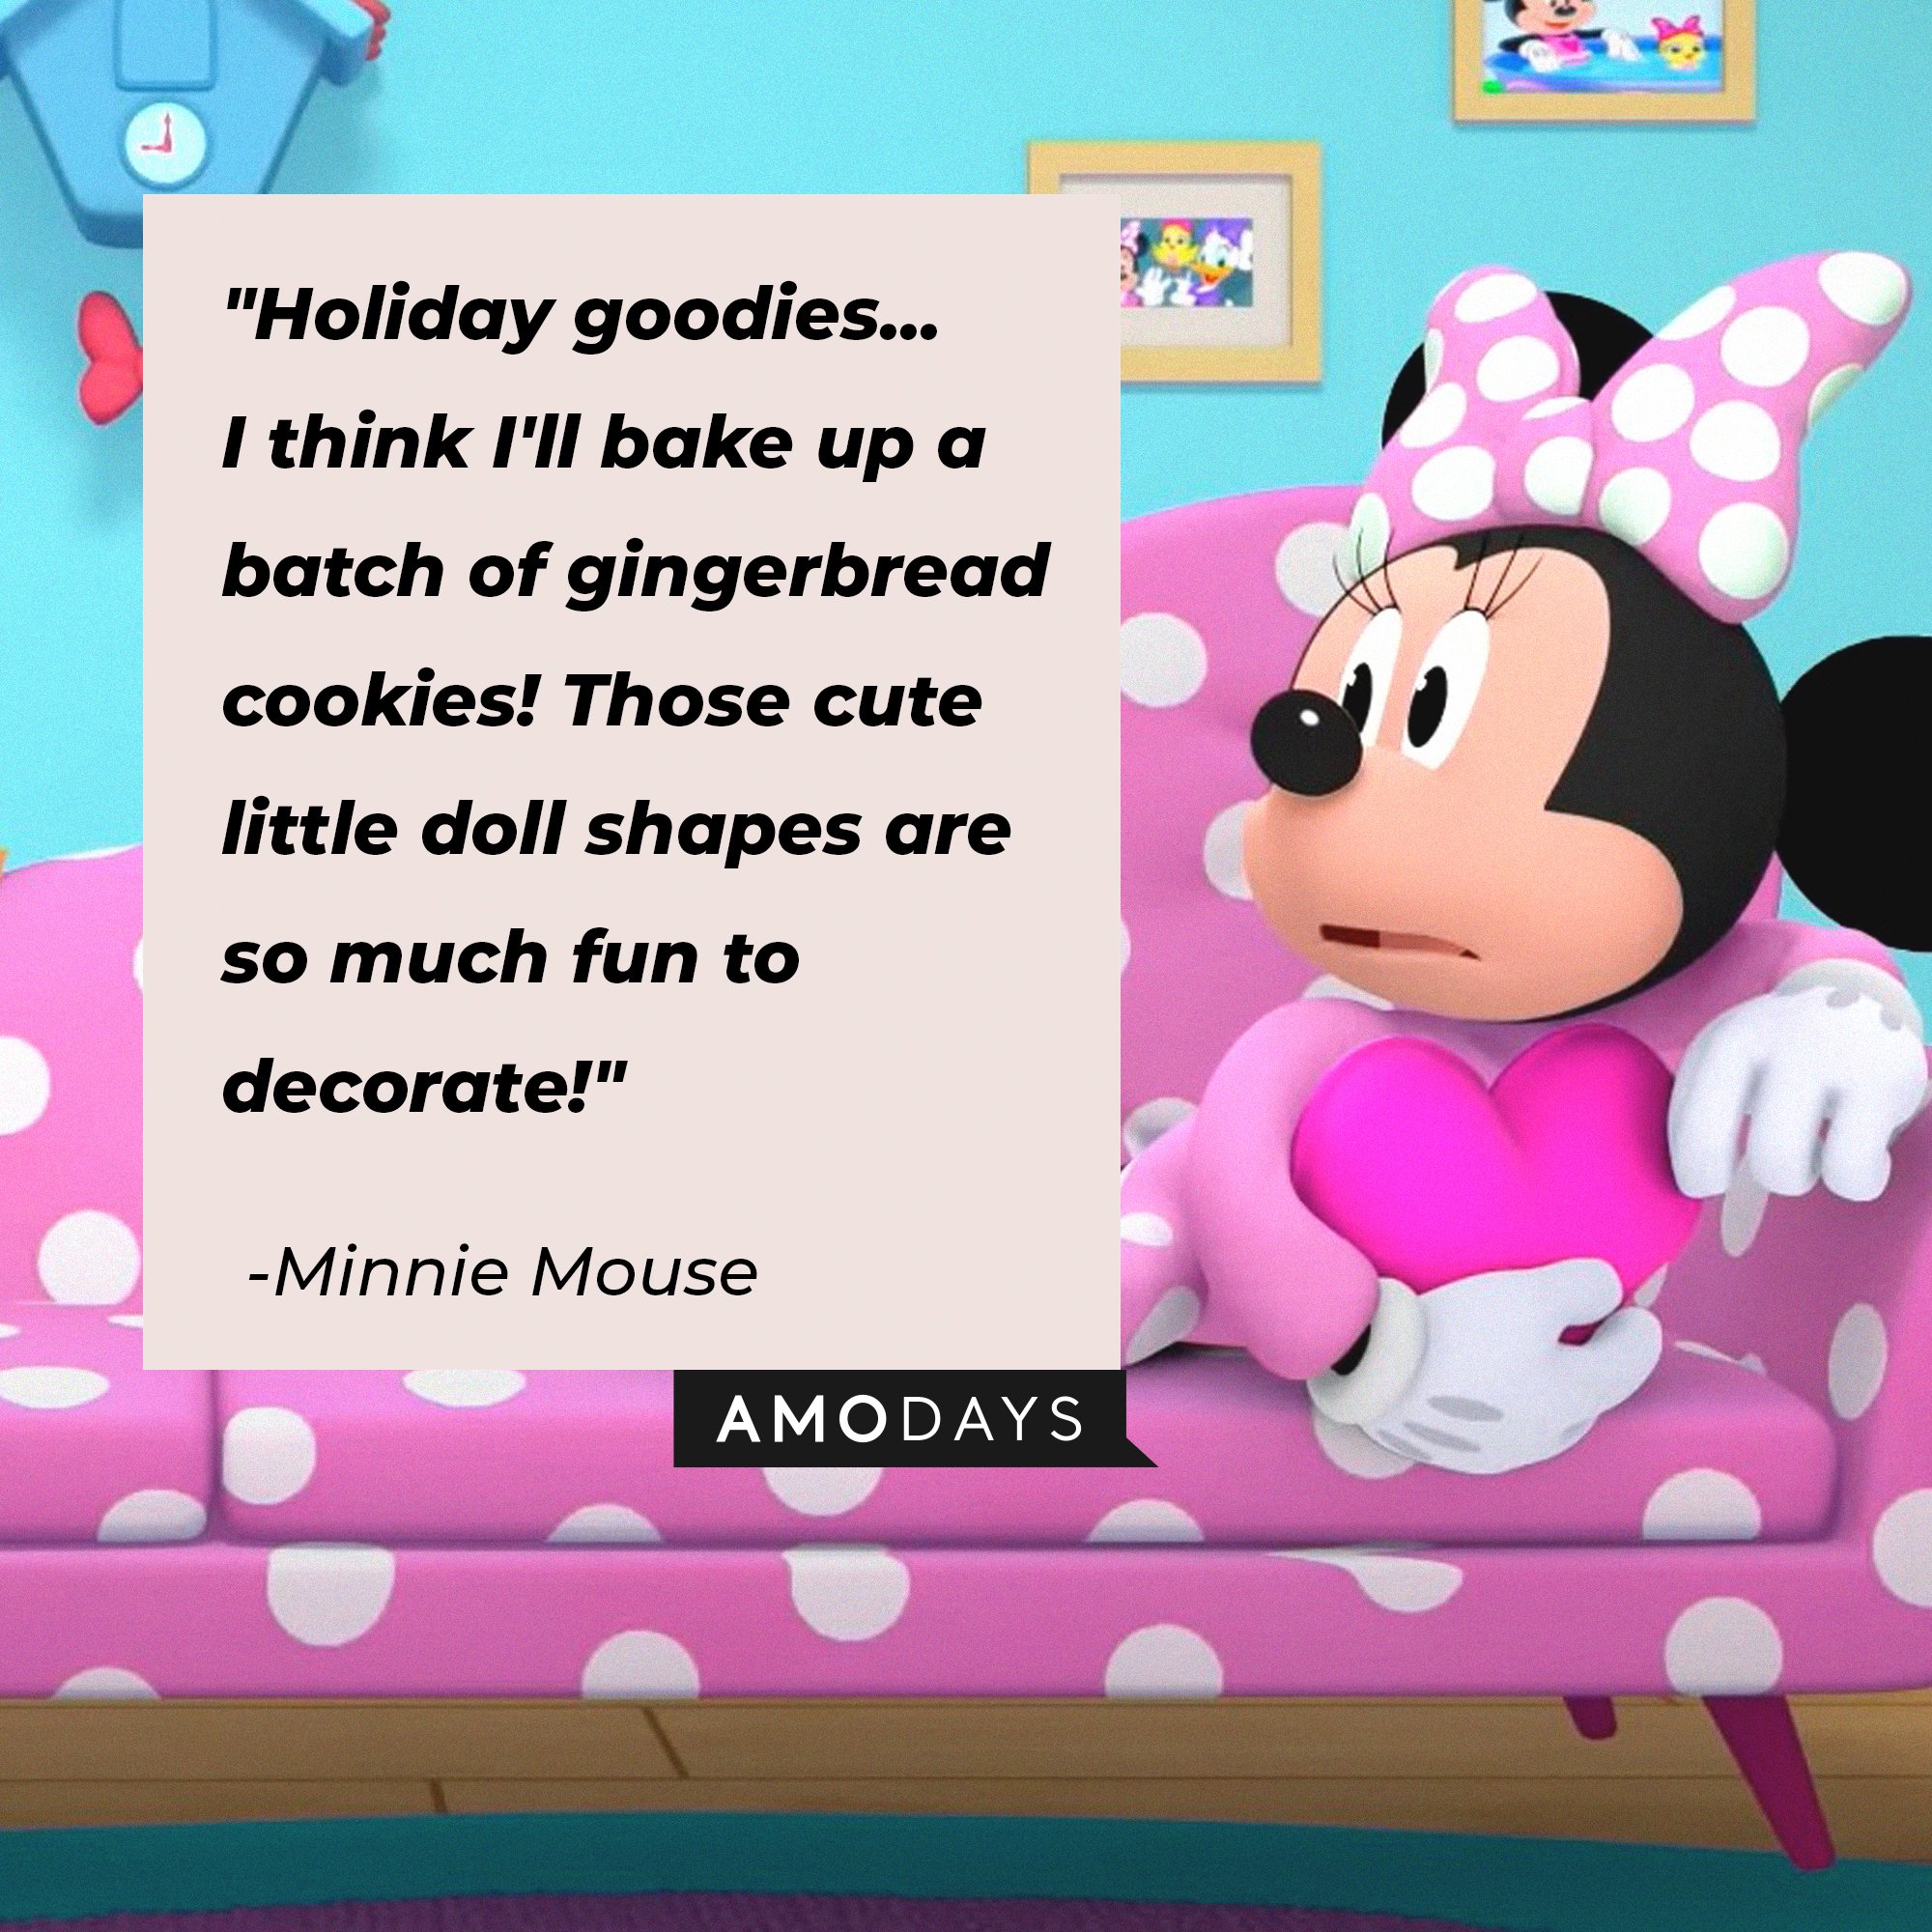  Minnie Mouse’s quote:"Holiday goodies... I think I'll bake up a batch of gingerbread cookies! Those cute little doll shapes are so much fun to decorate!" | Image: AmoDays